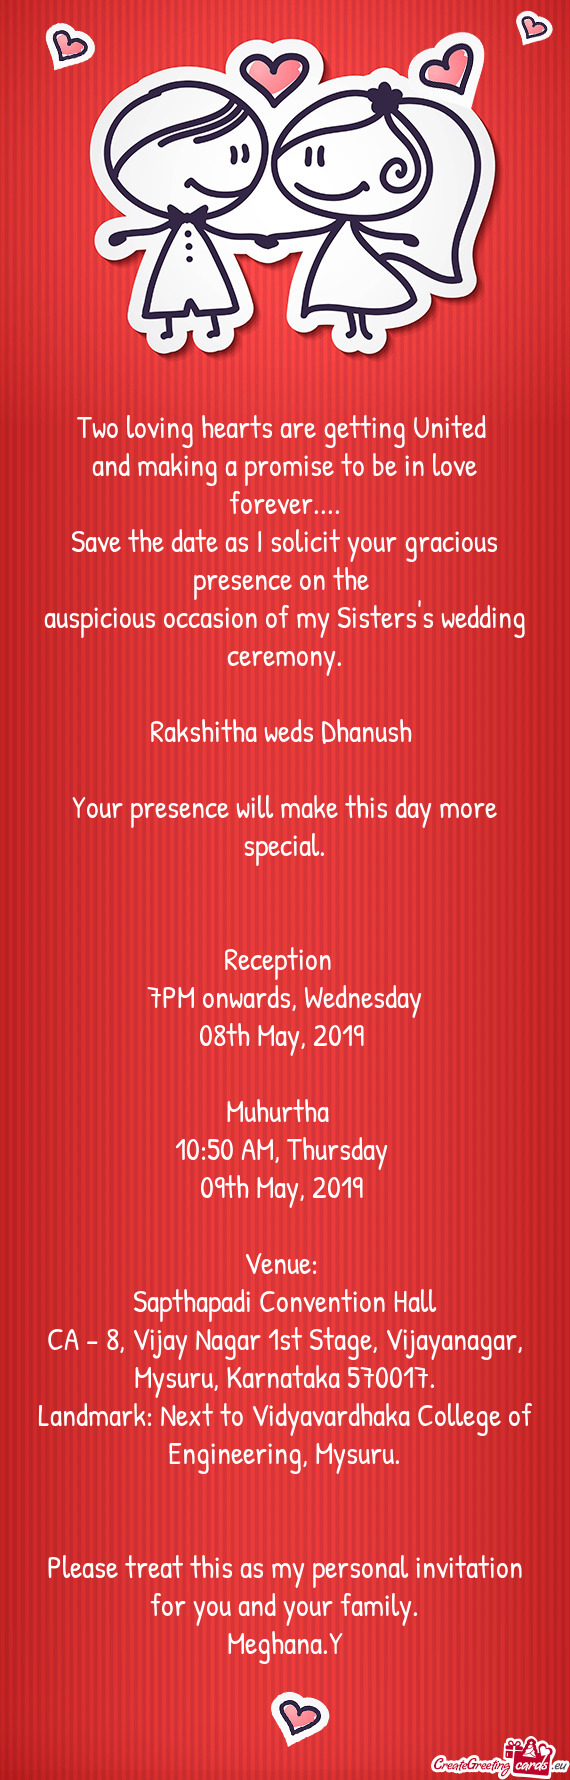 Rakshitha weds Dhanush 
 
 Your presence will make this day more special